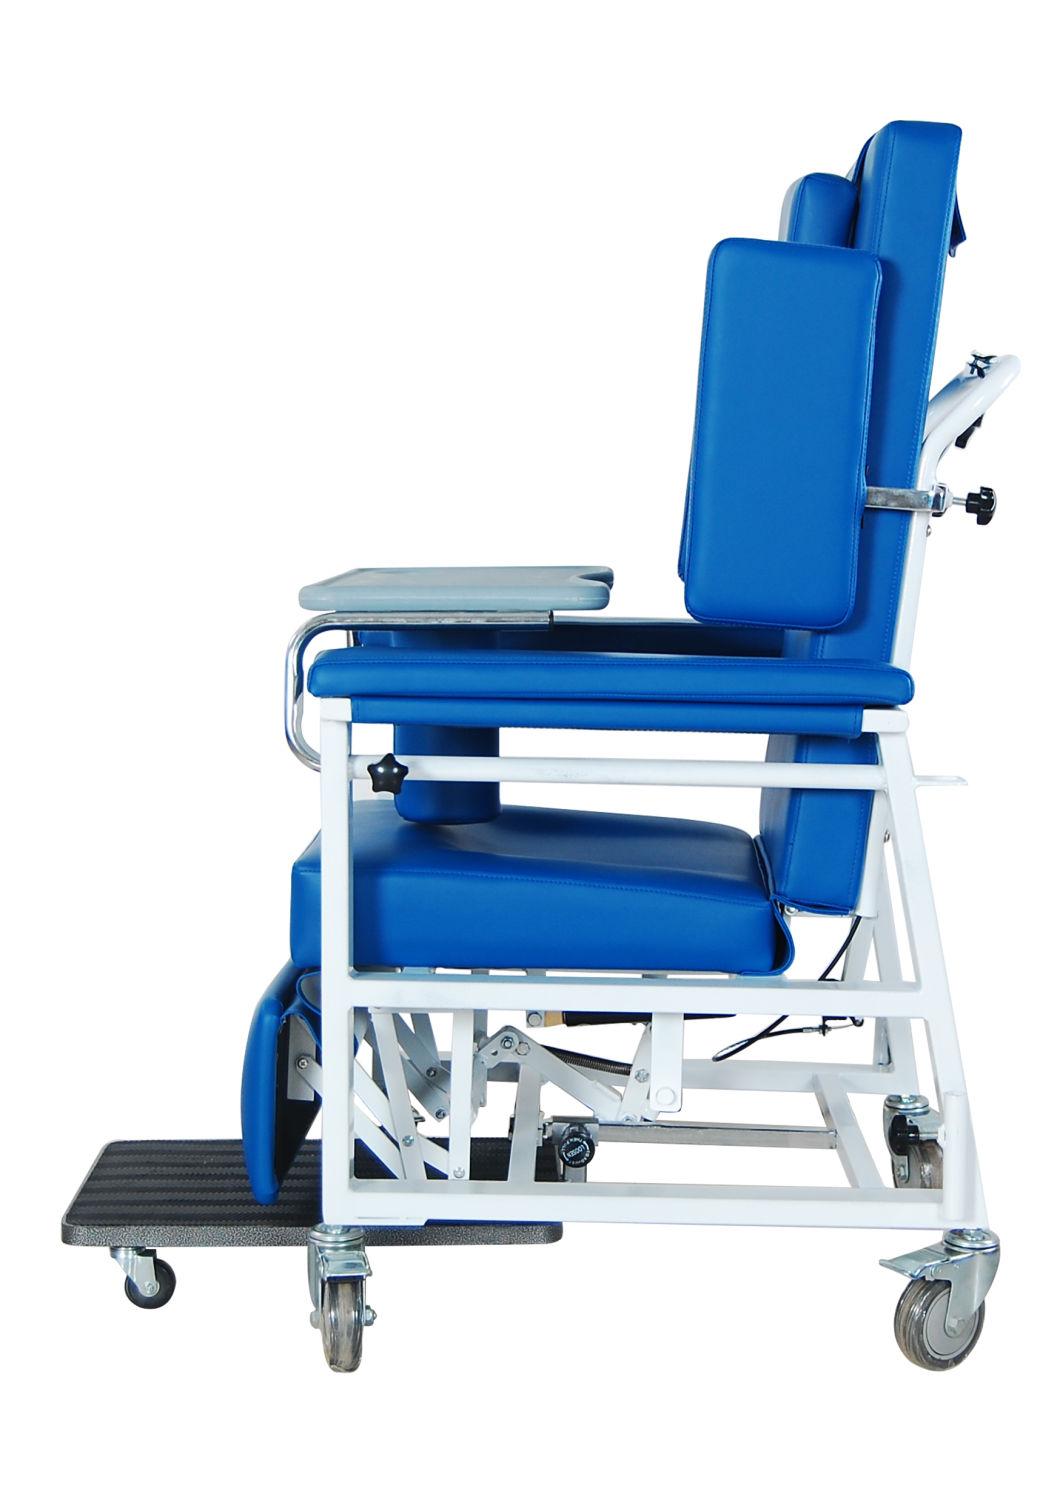 Medical Rehabilitation Chair with Manual Force Height Adjustable-Mslyoc3